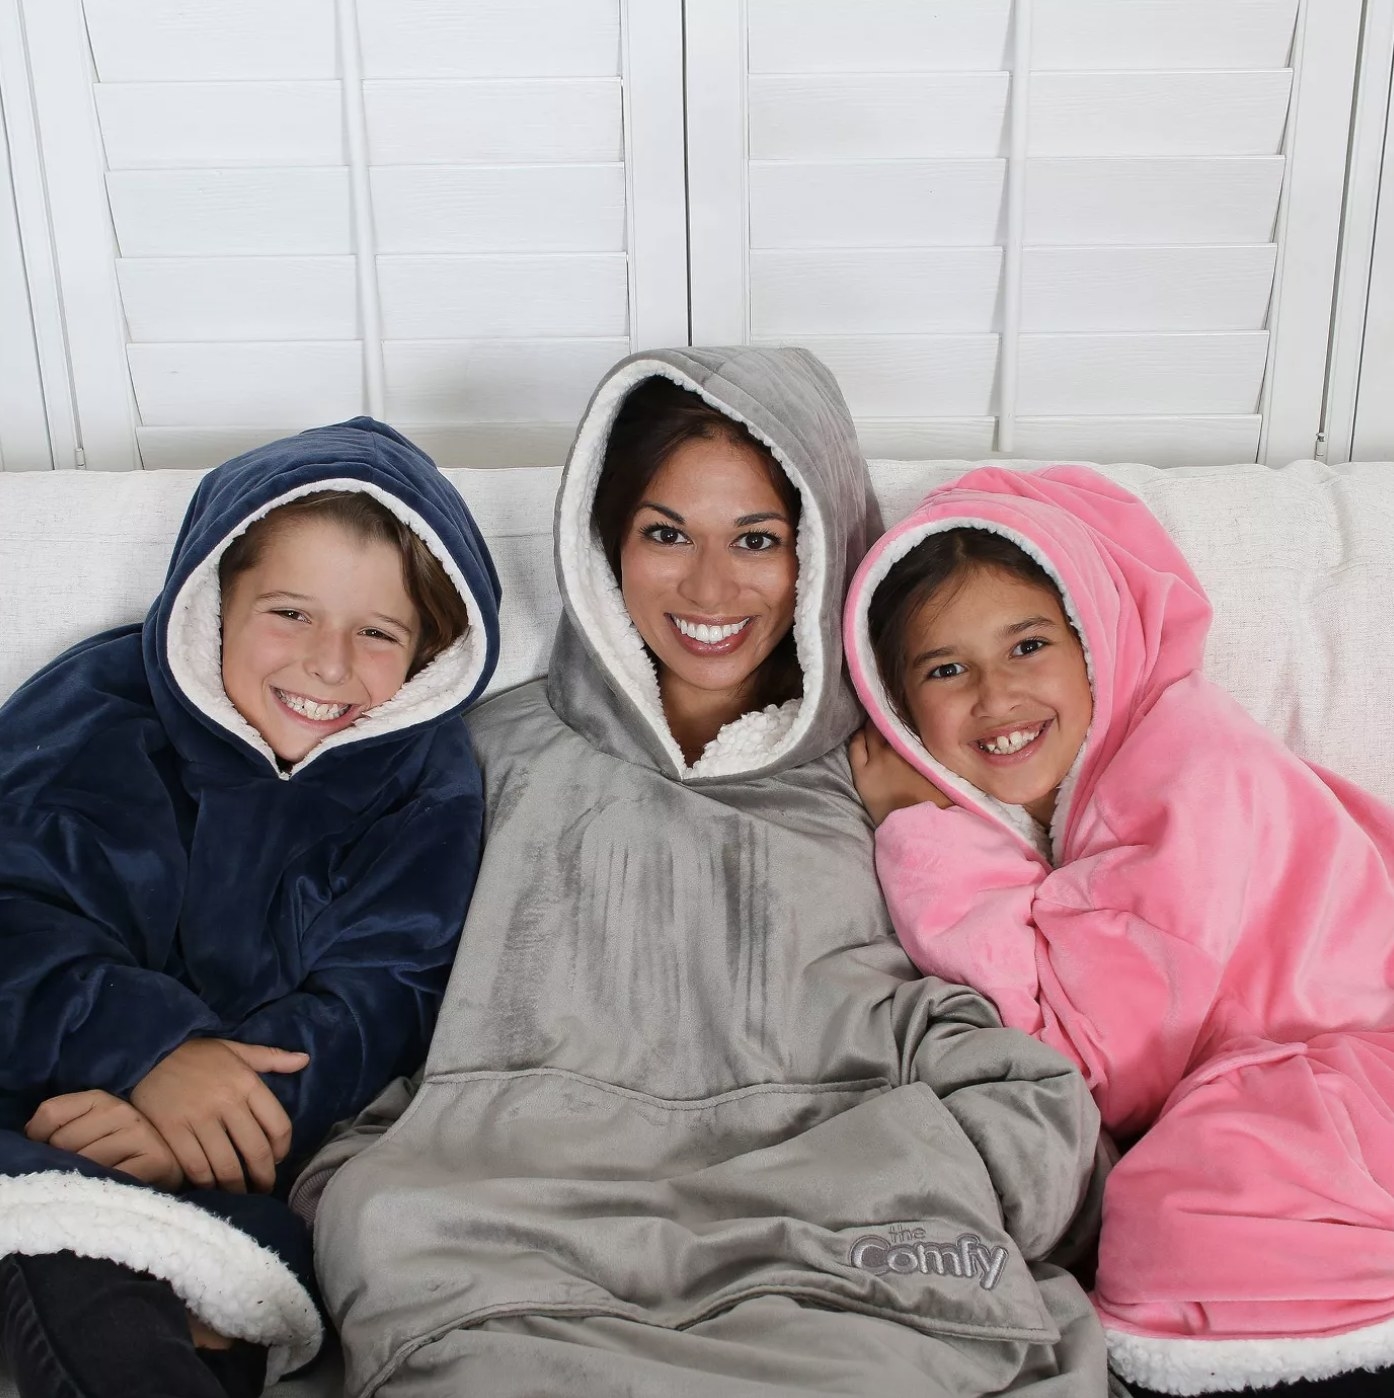 There are two children in the blanket hoodies — one blue and one pink — and one adult in a grey one